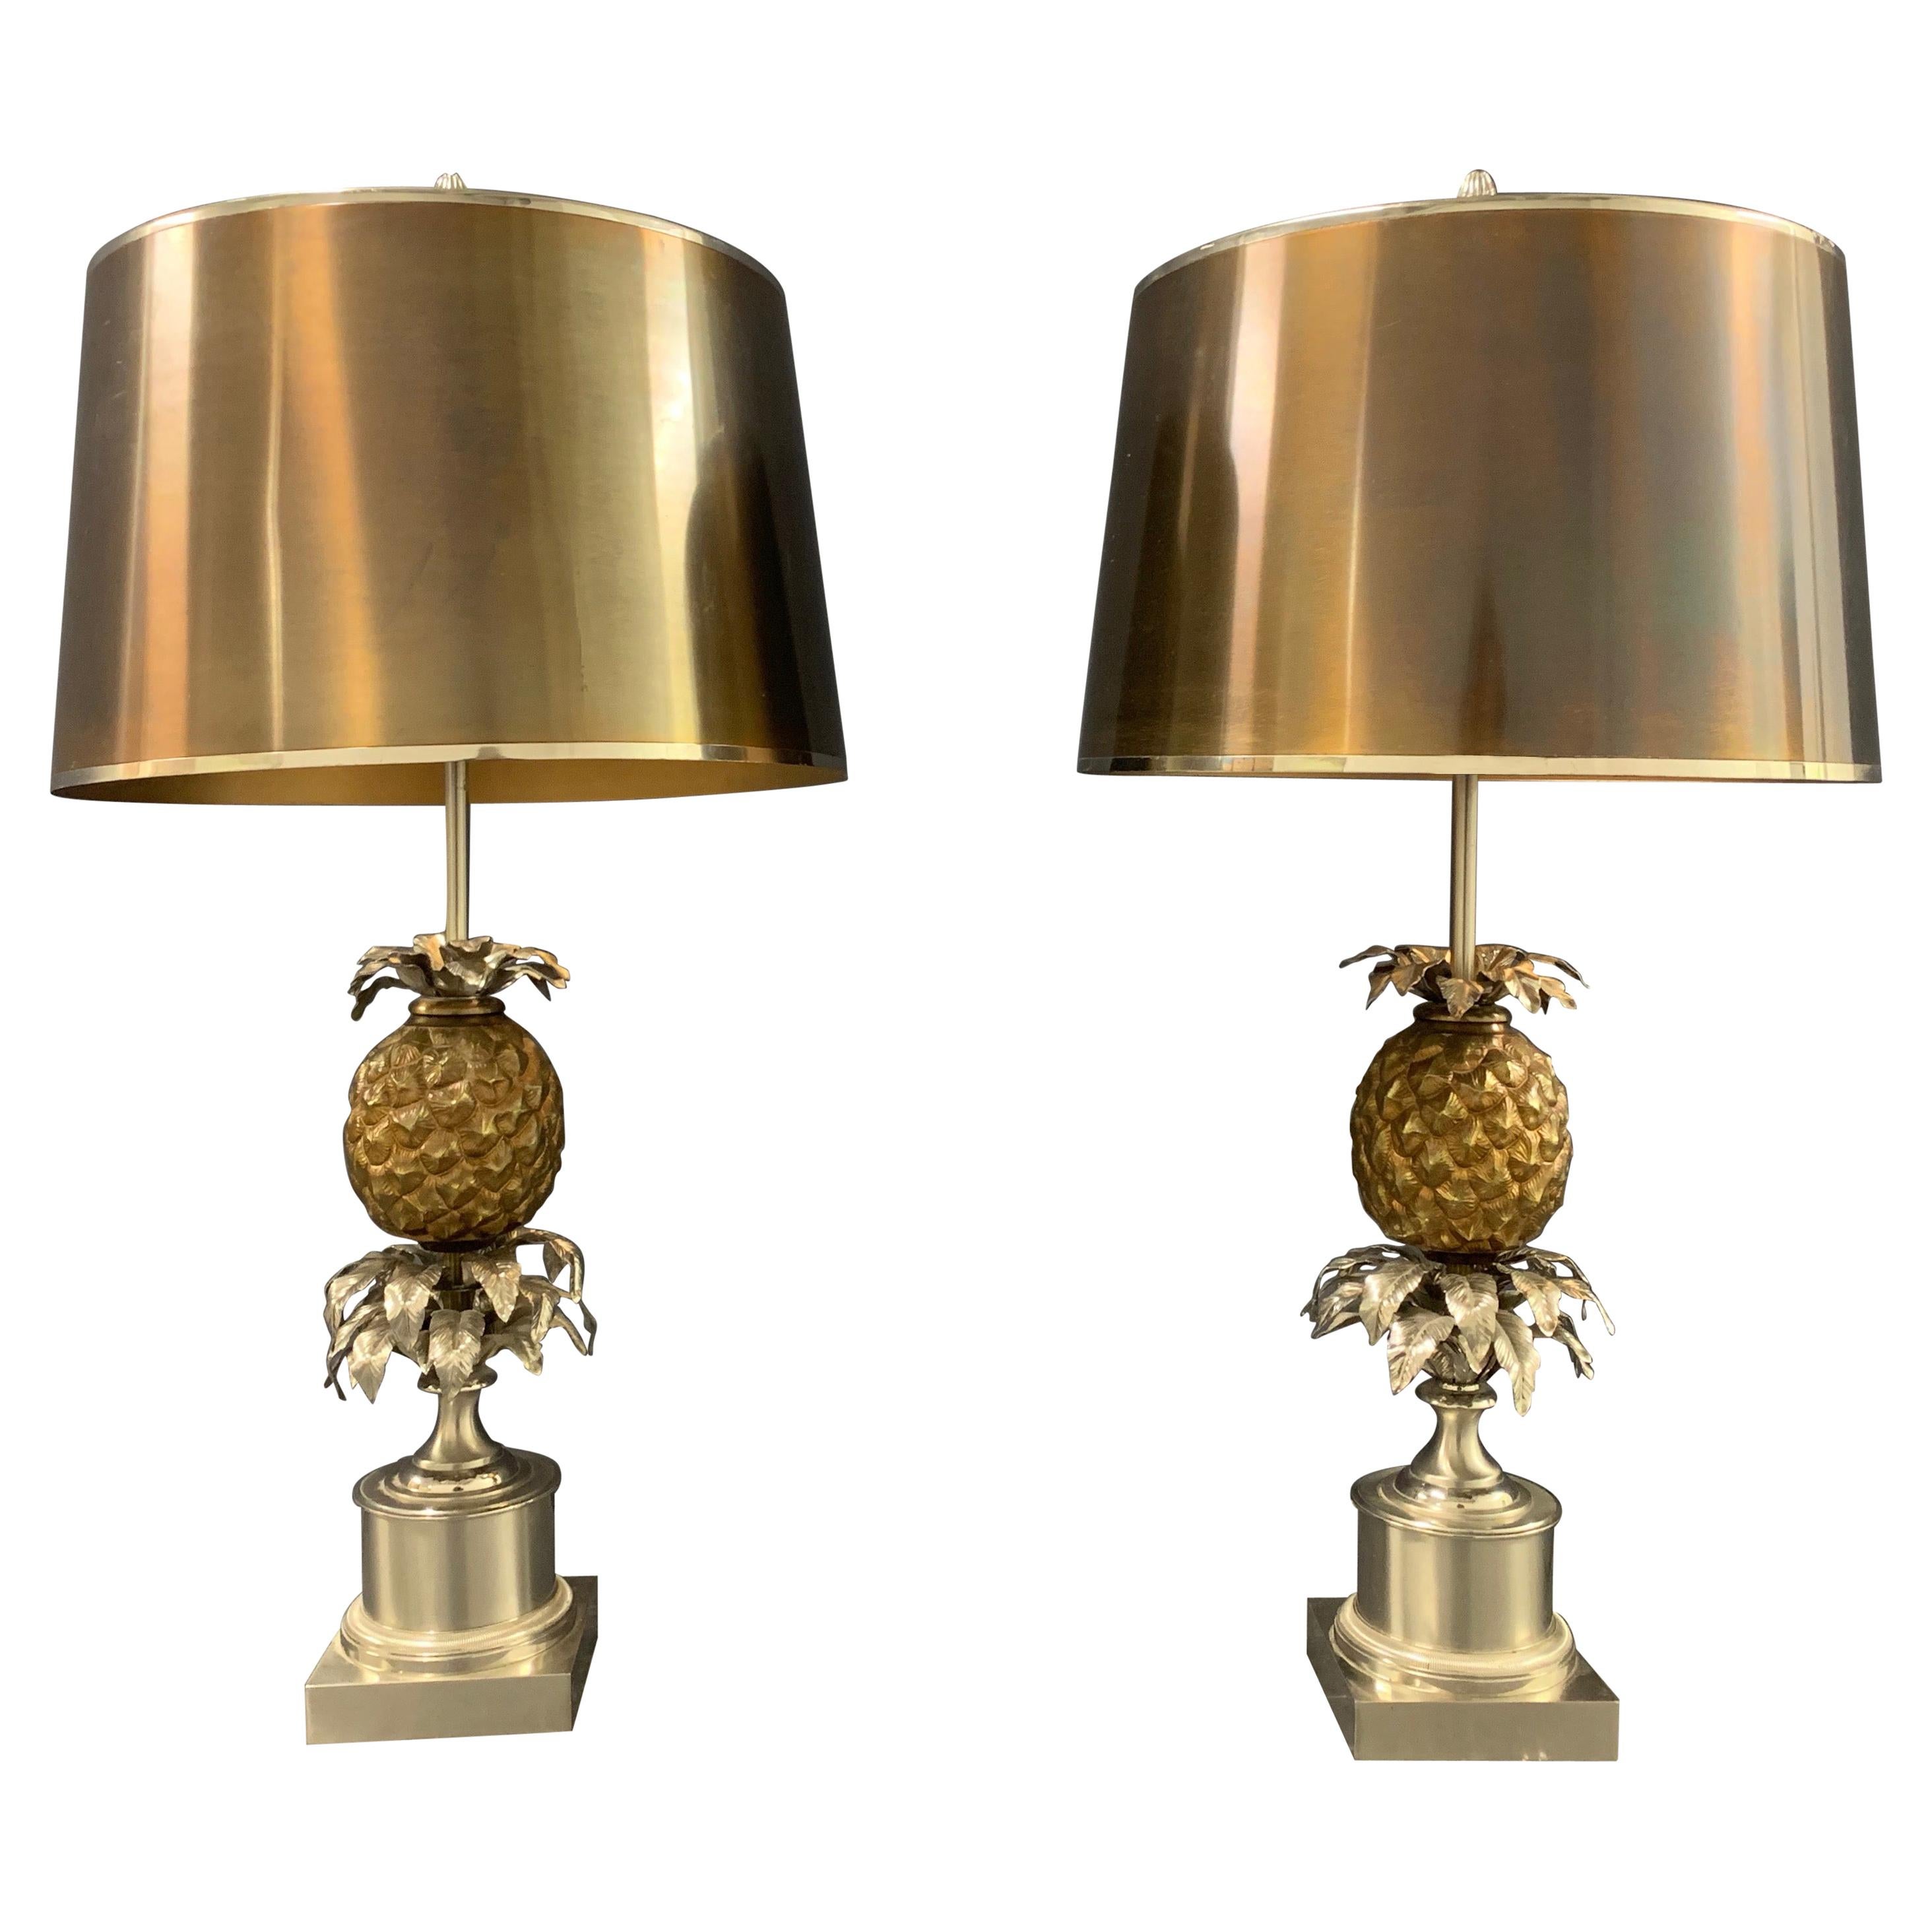 Wonderful Pair of Maison Charles Pineapple Table Lamps